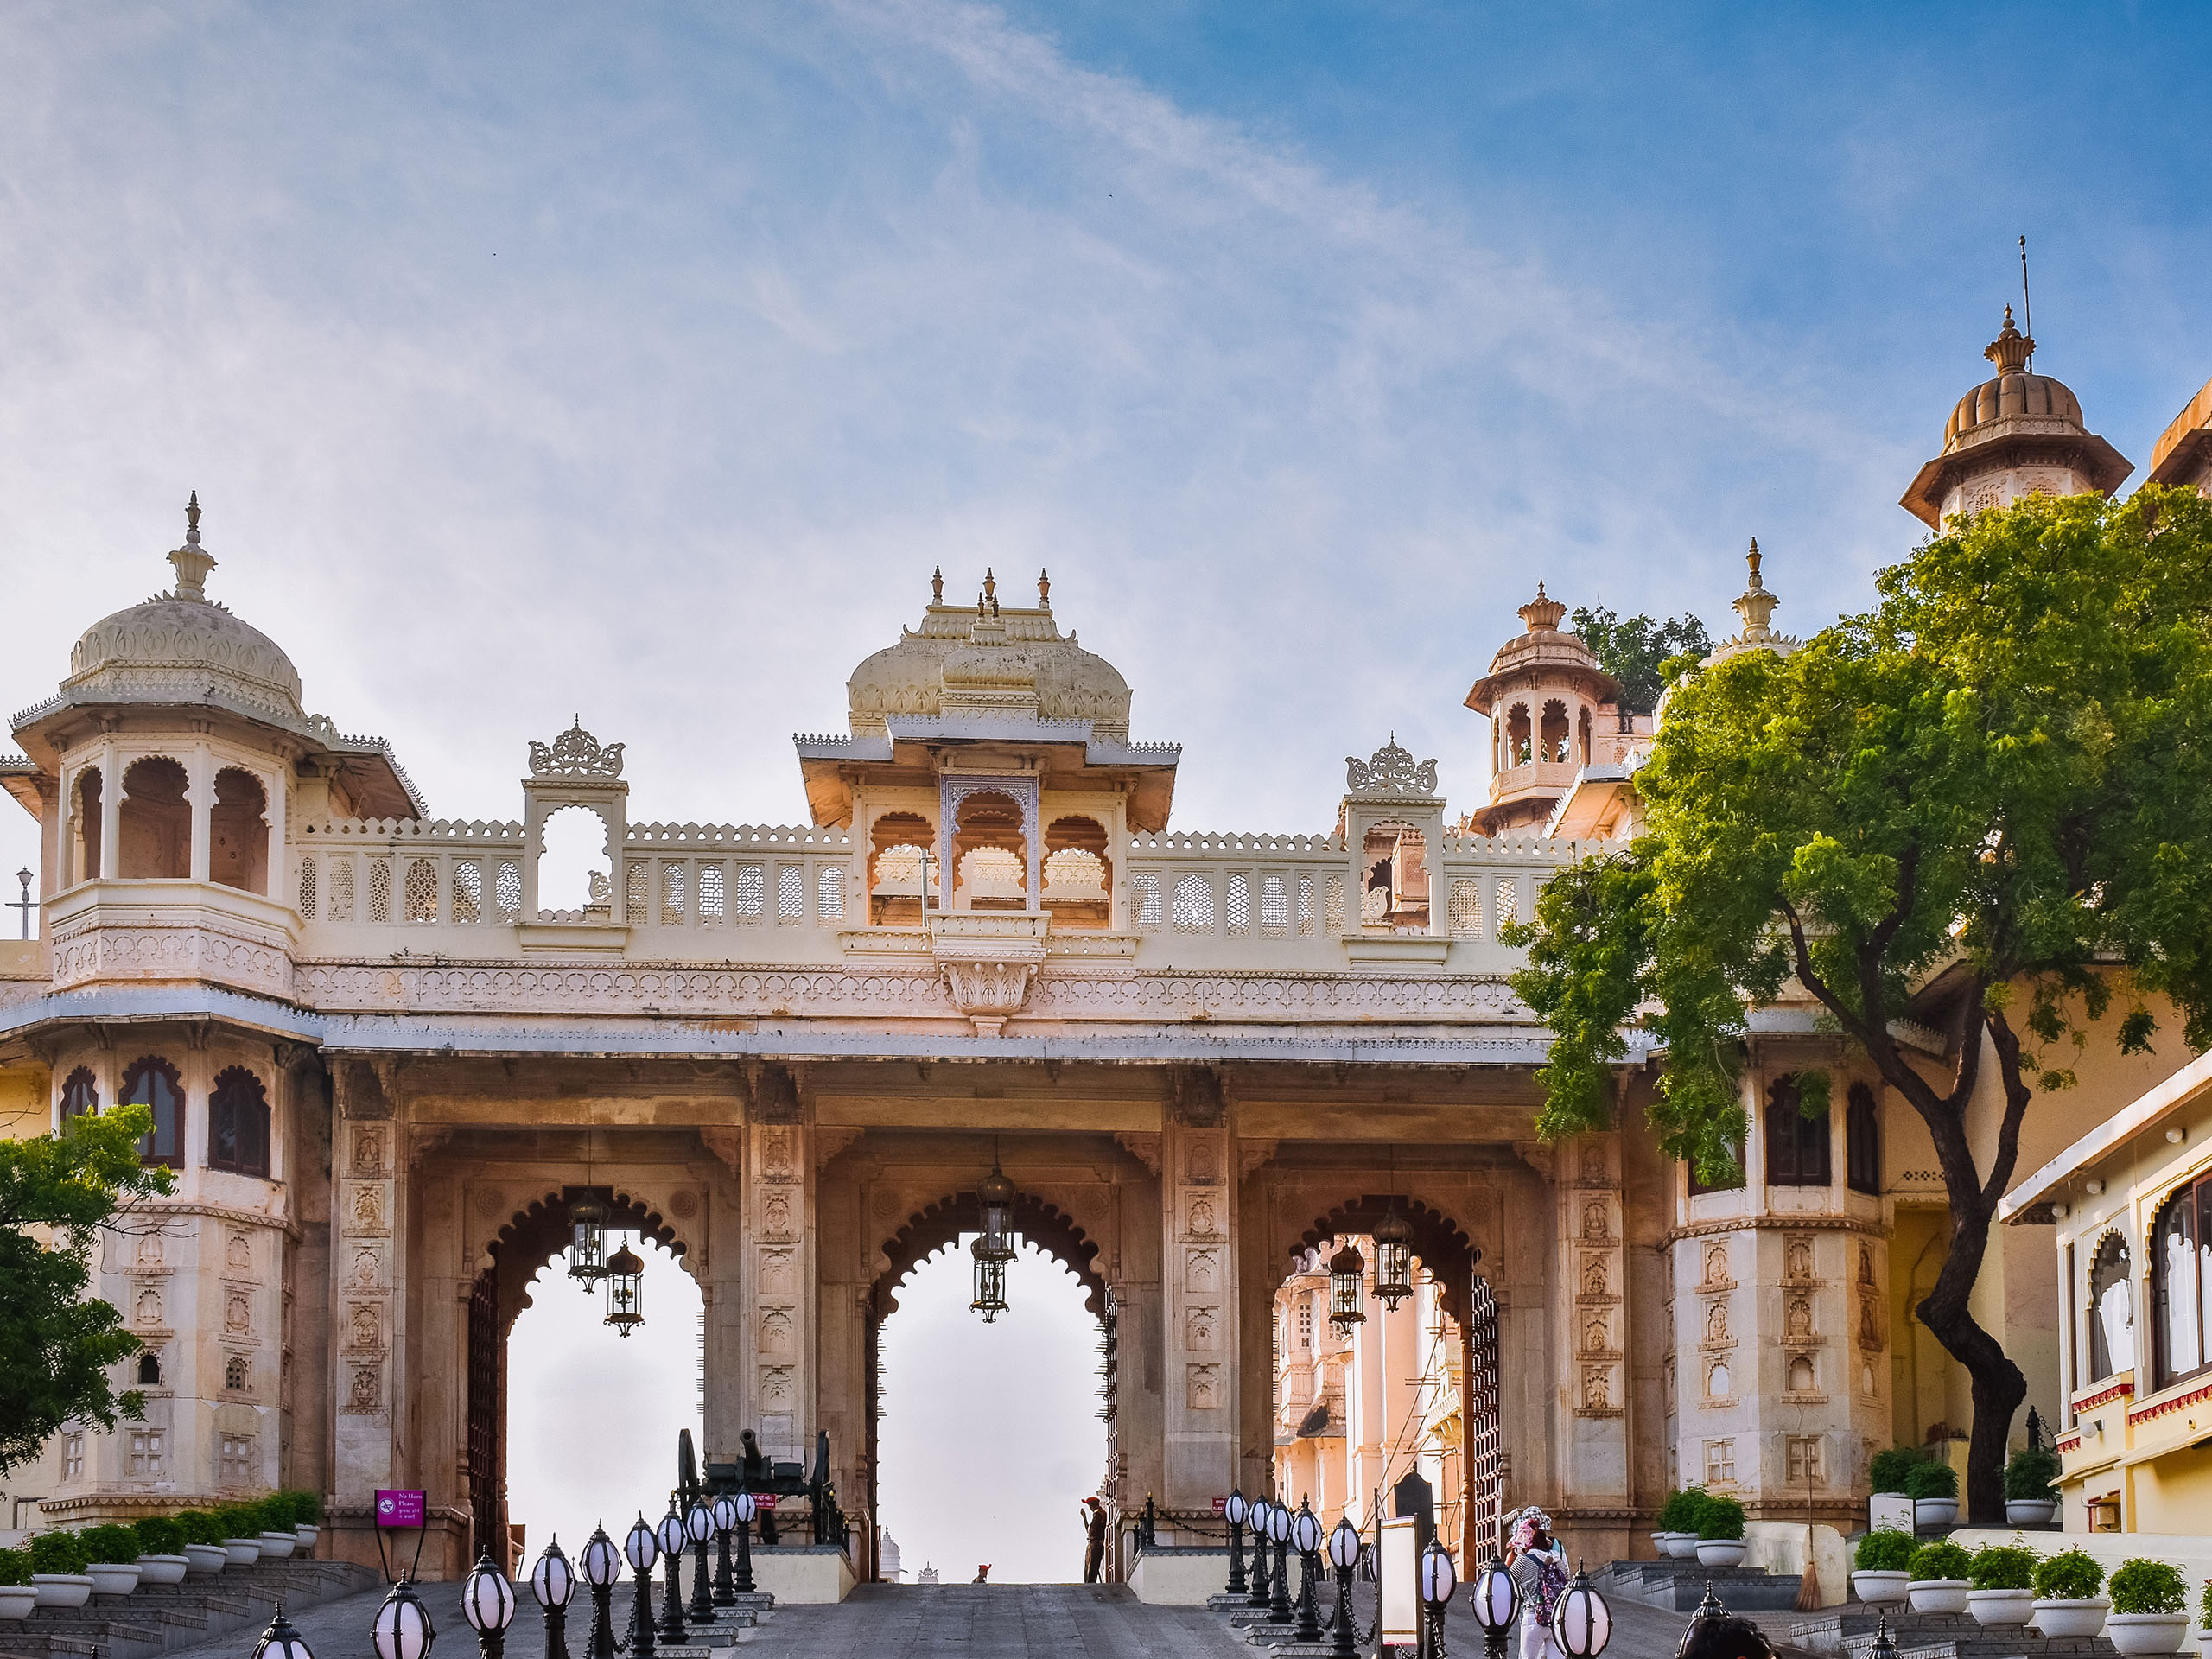 Udaipur is considered a romantic location